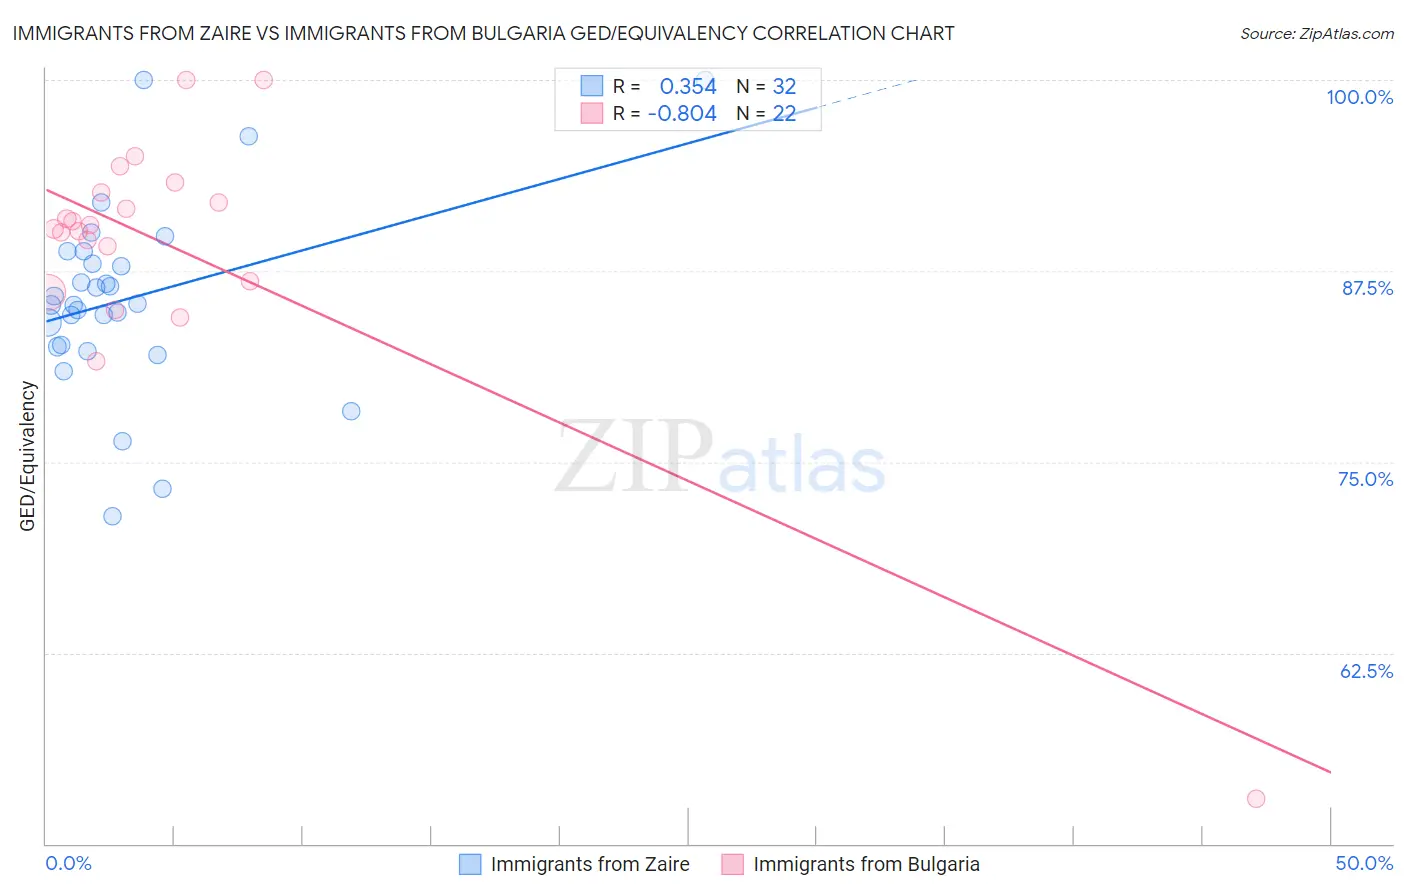 Immigrants from Zaire vs Immigrants from Bulgaria GED/Equivalency